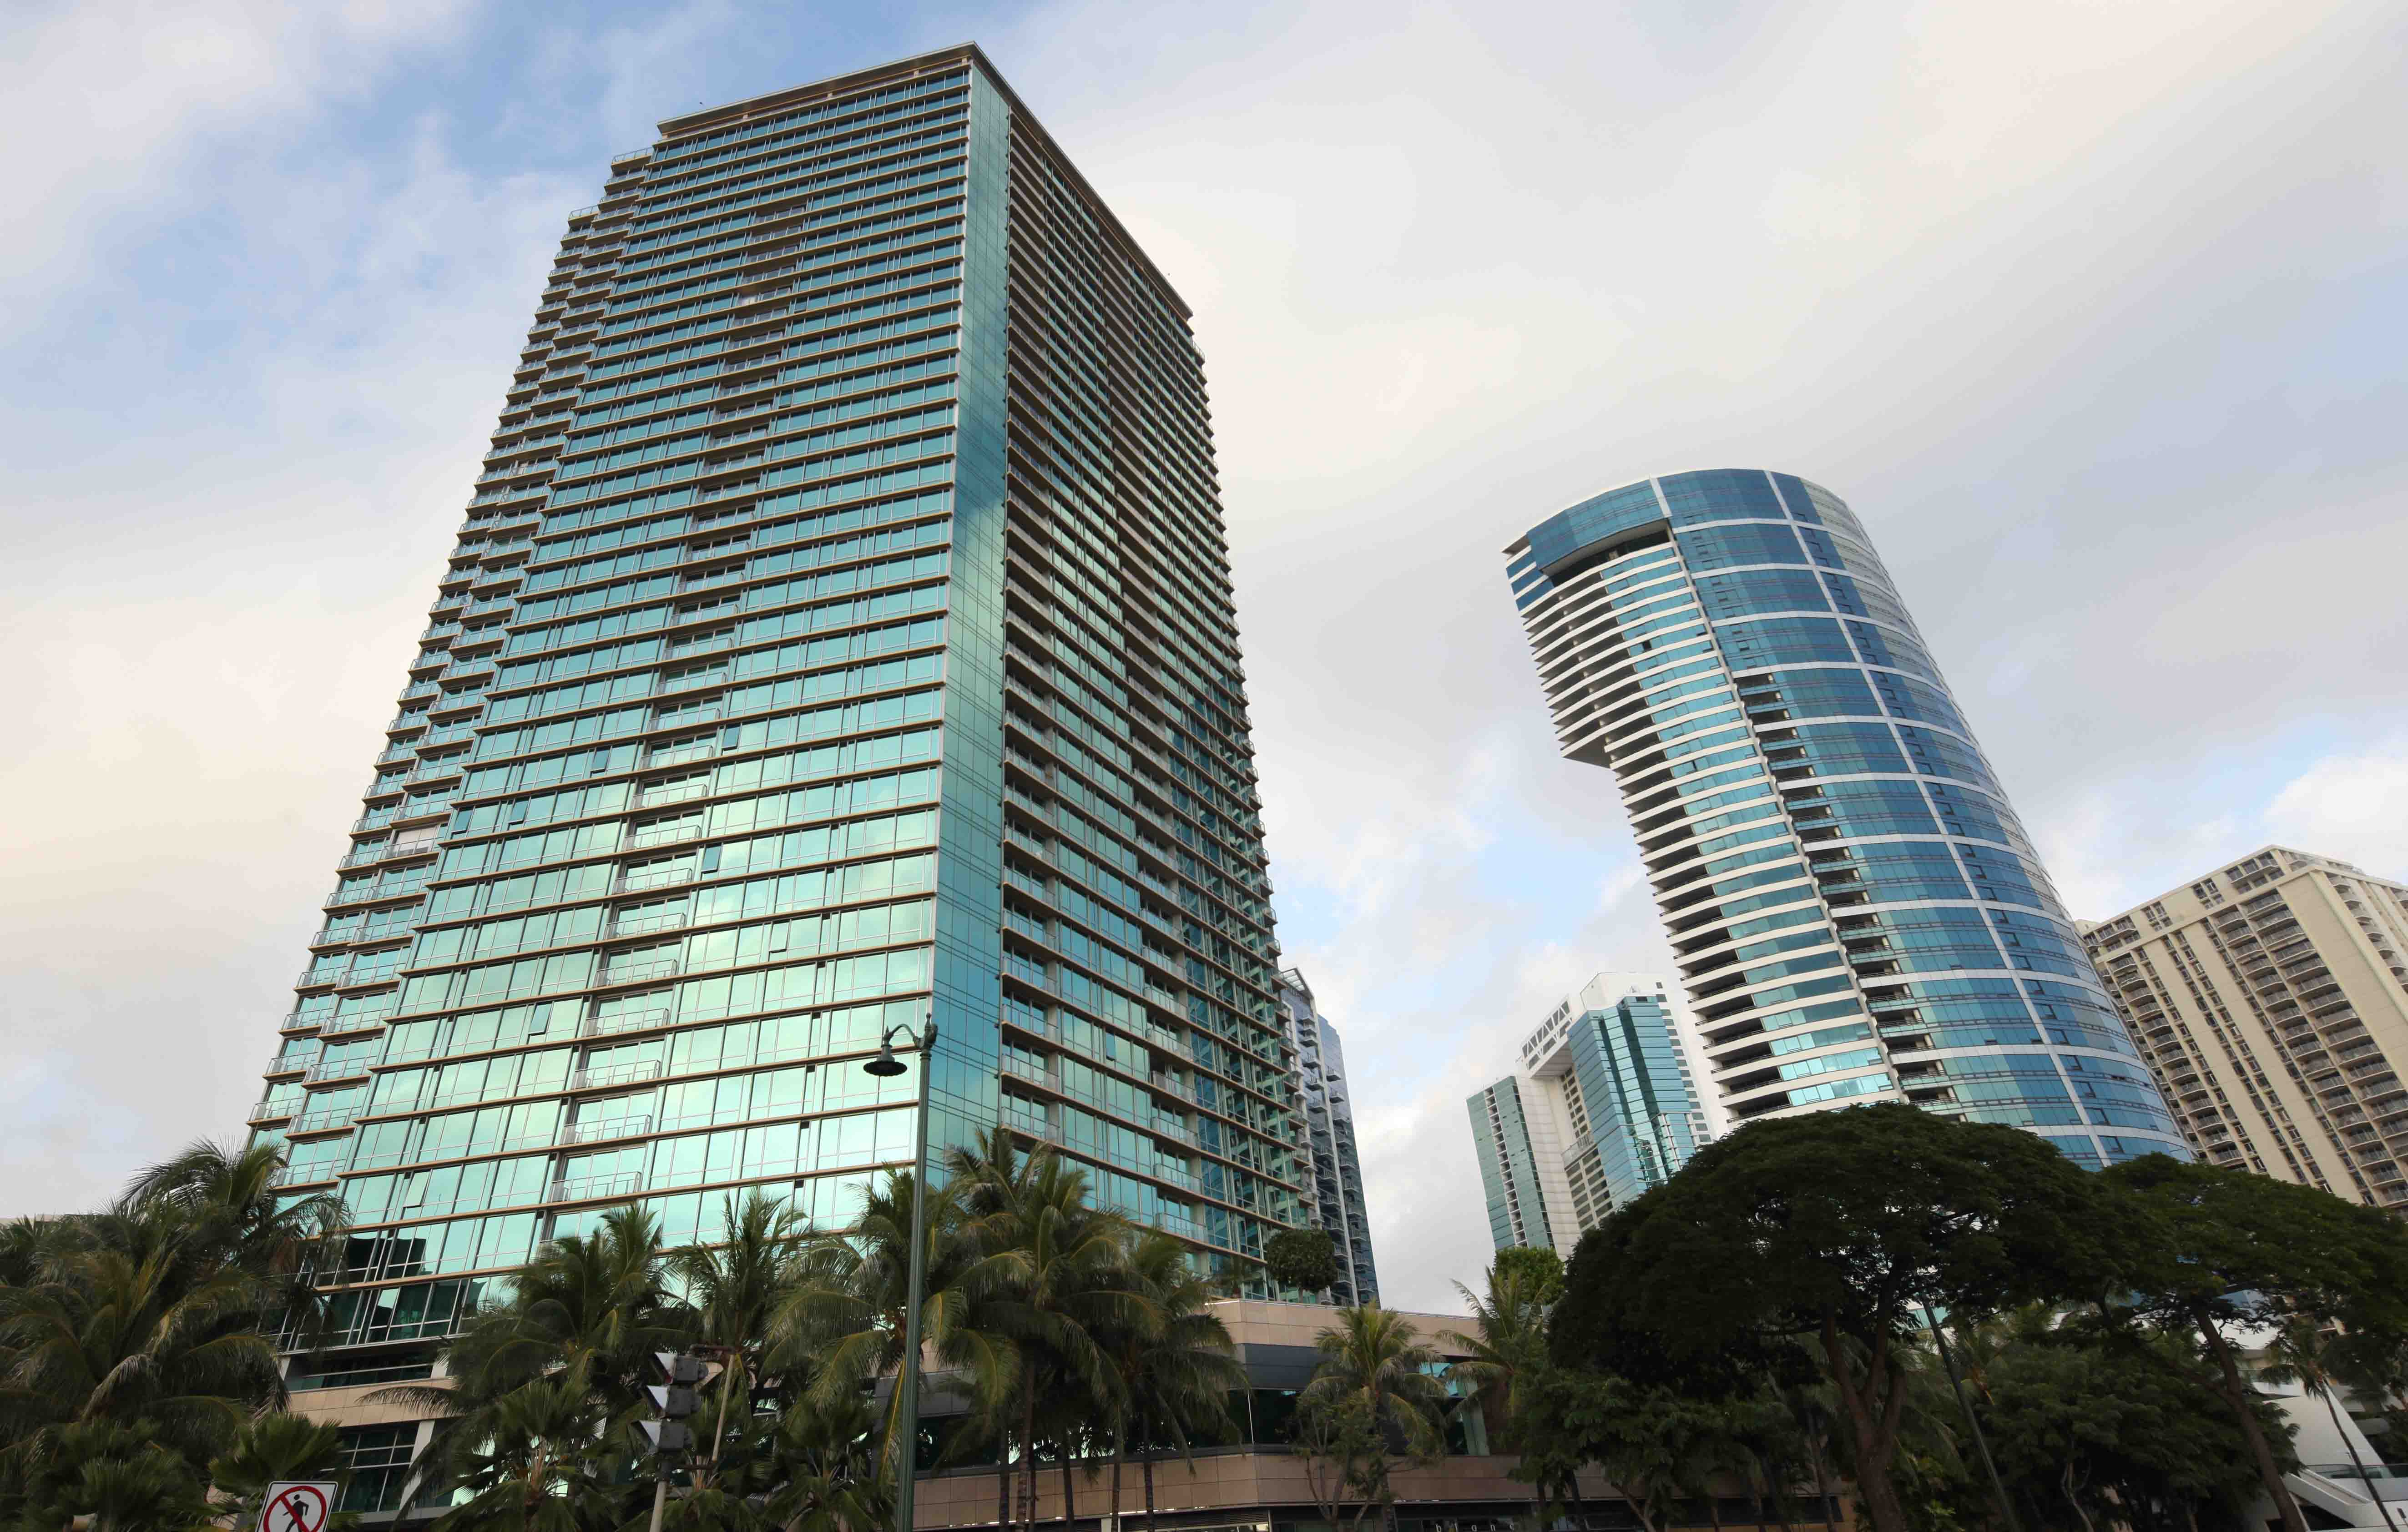 Honolulu High-rise Buildings 2 | Letter from Lund